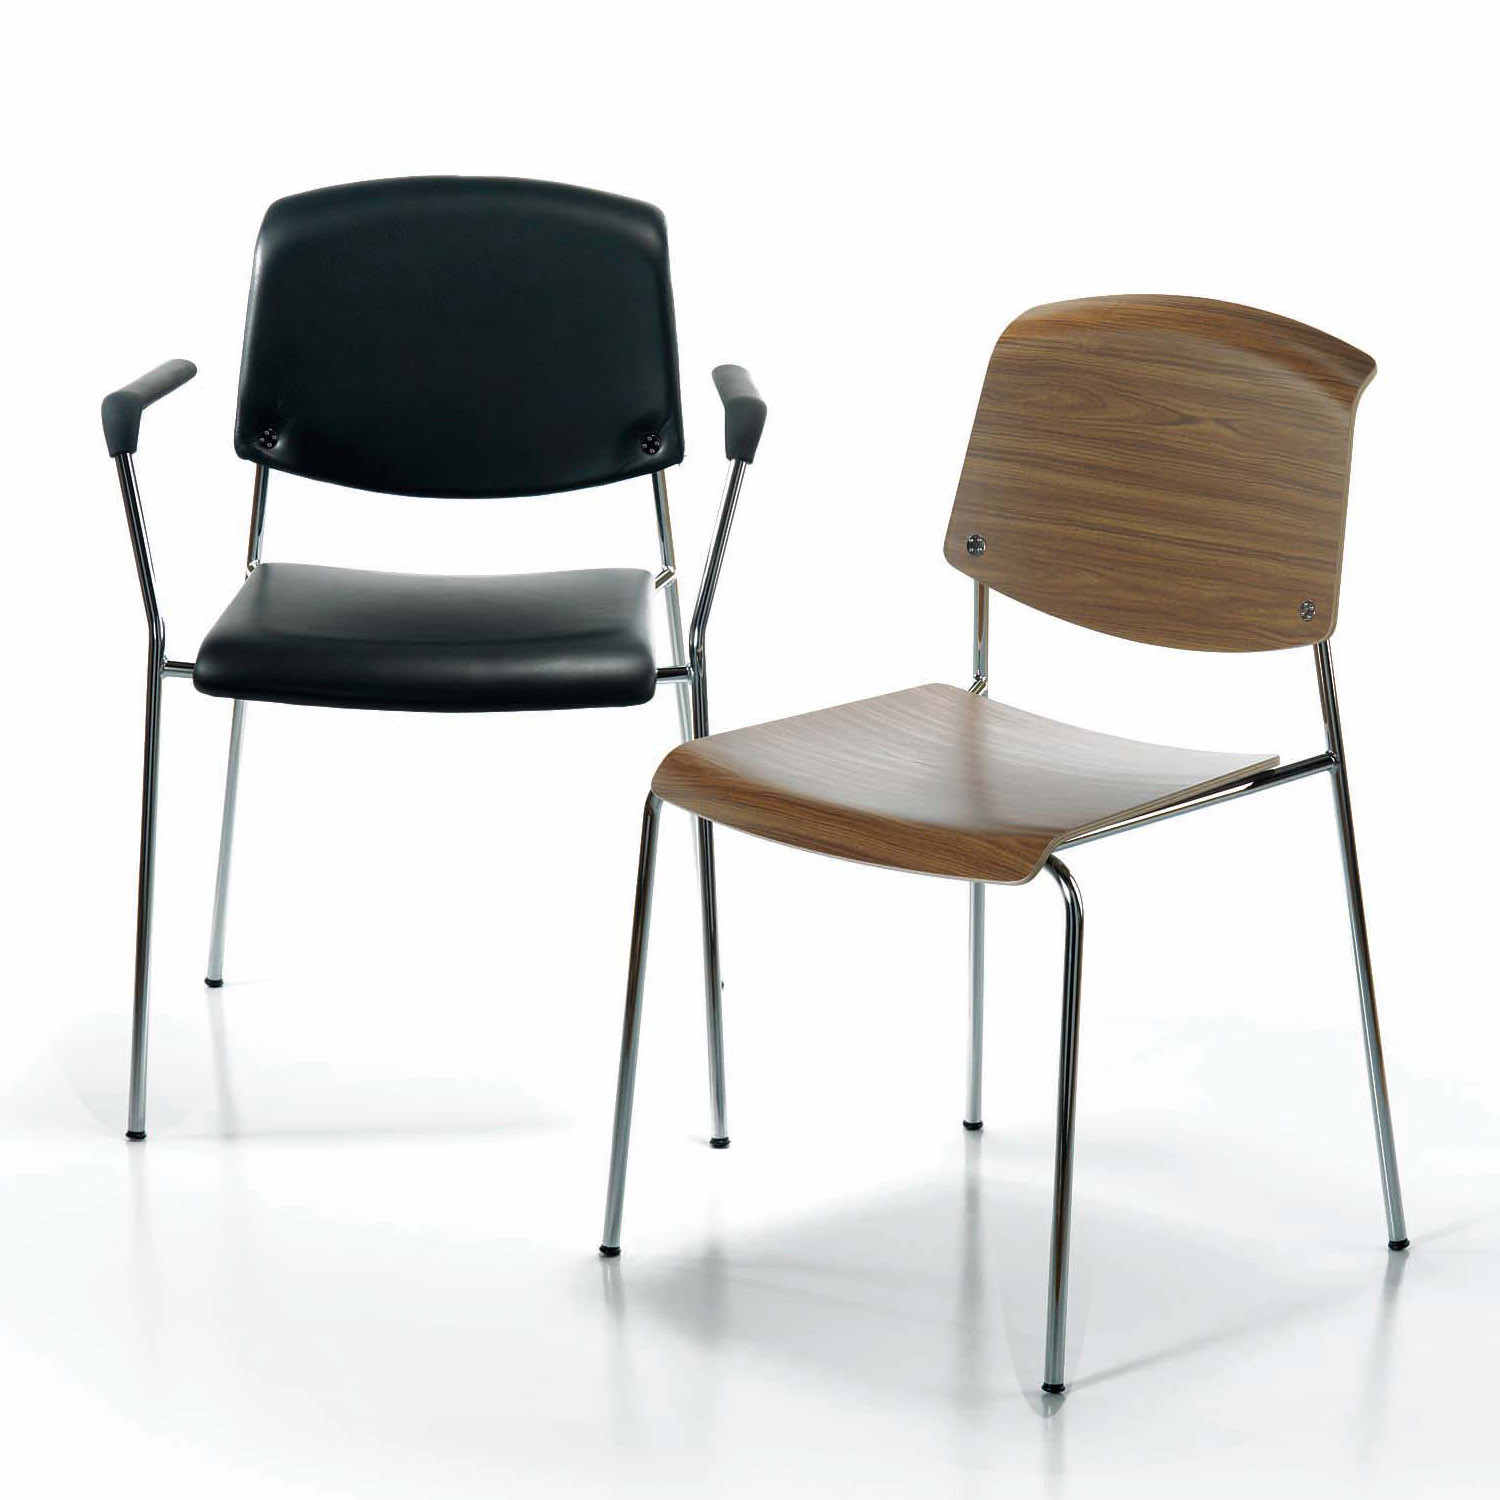 Pause Chairs